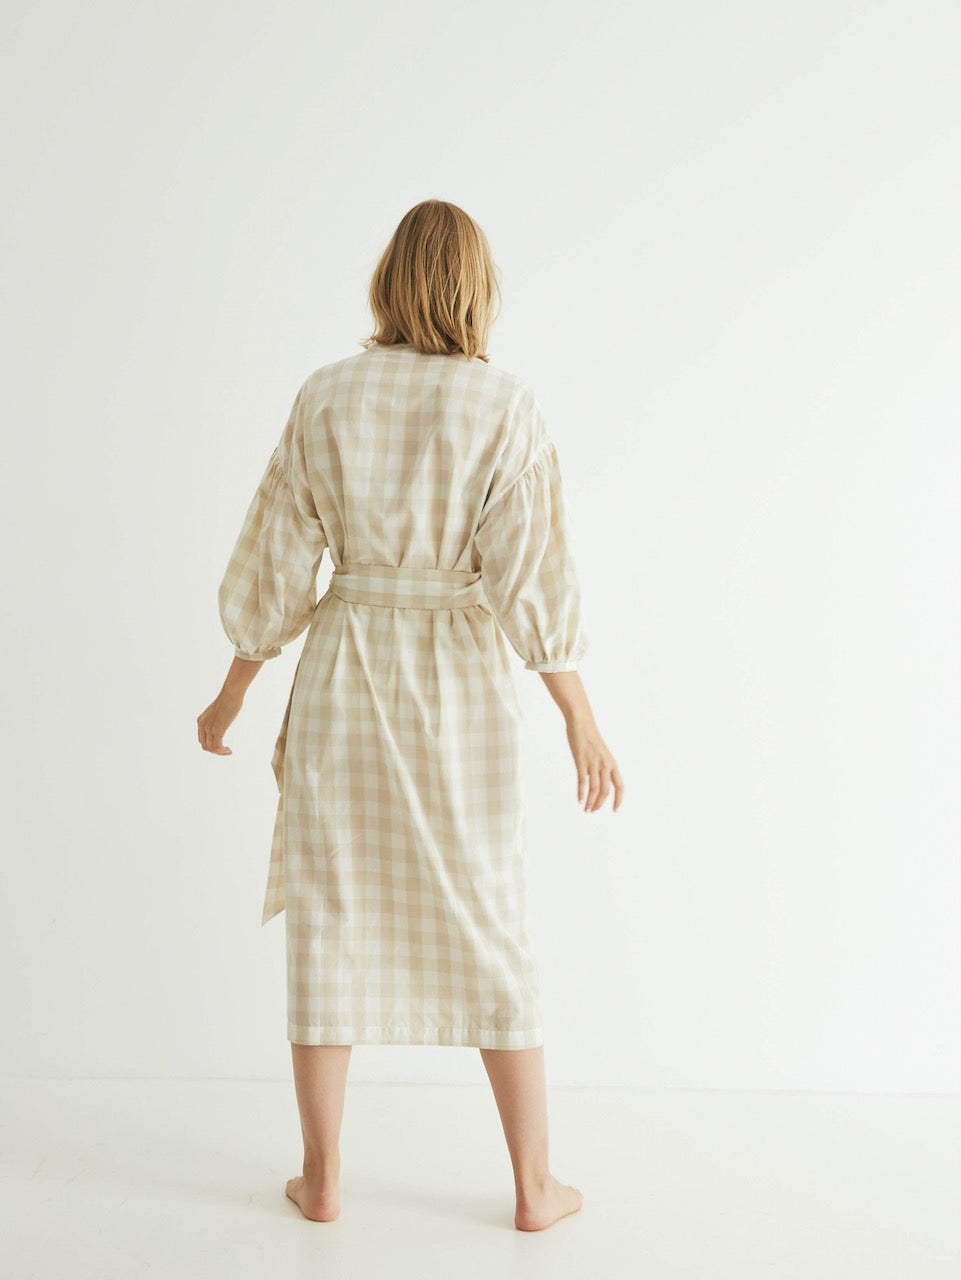 A person stands facing away from the camera, wearing a general sleep Agnes Wrap - Oatmeal Gingham with a tied belt.